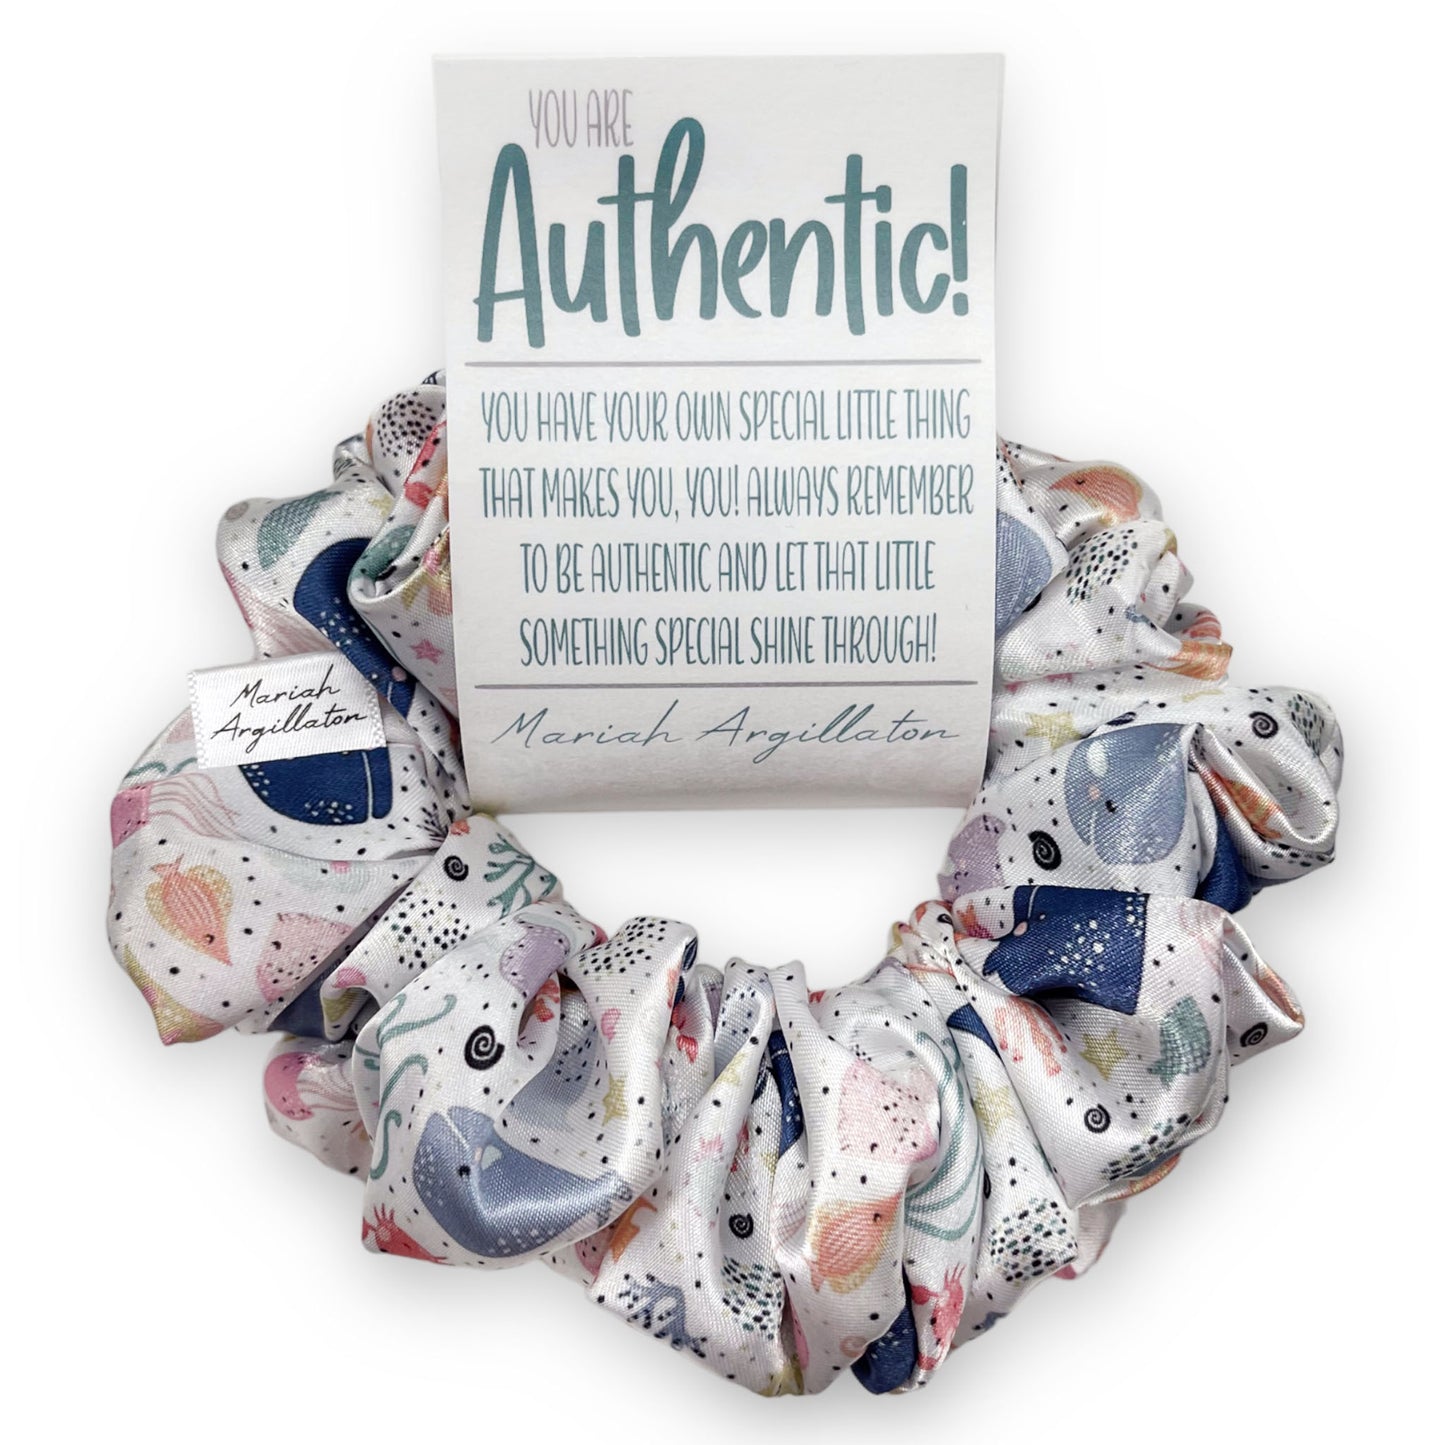 You Are Authentic! Regular Scrunchie!